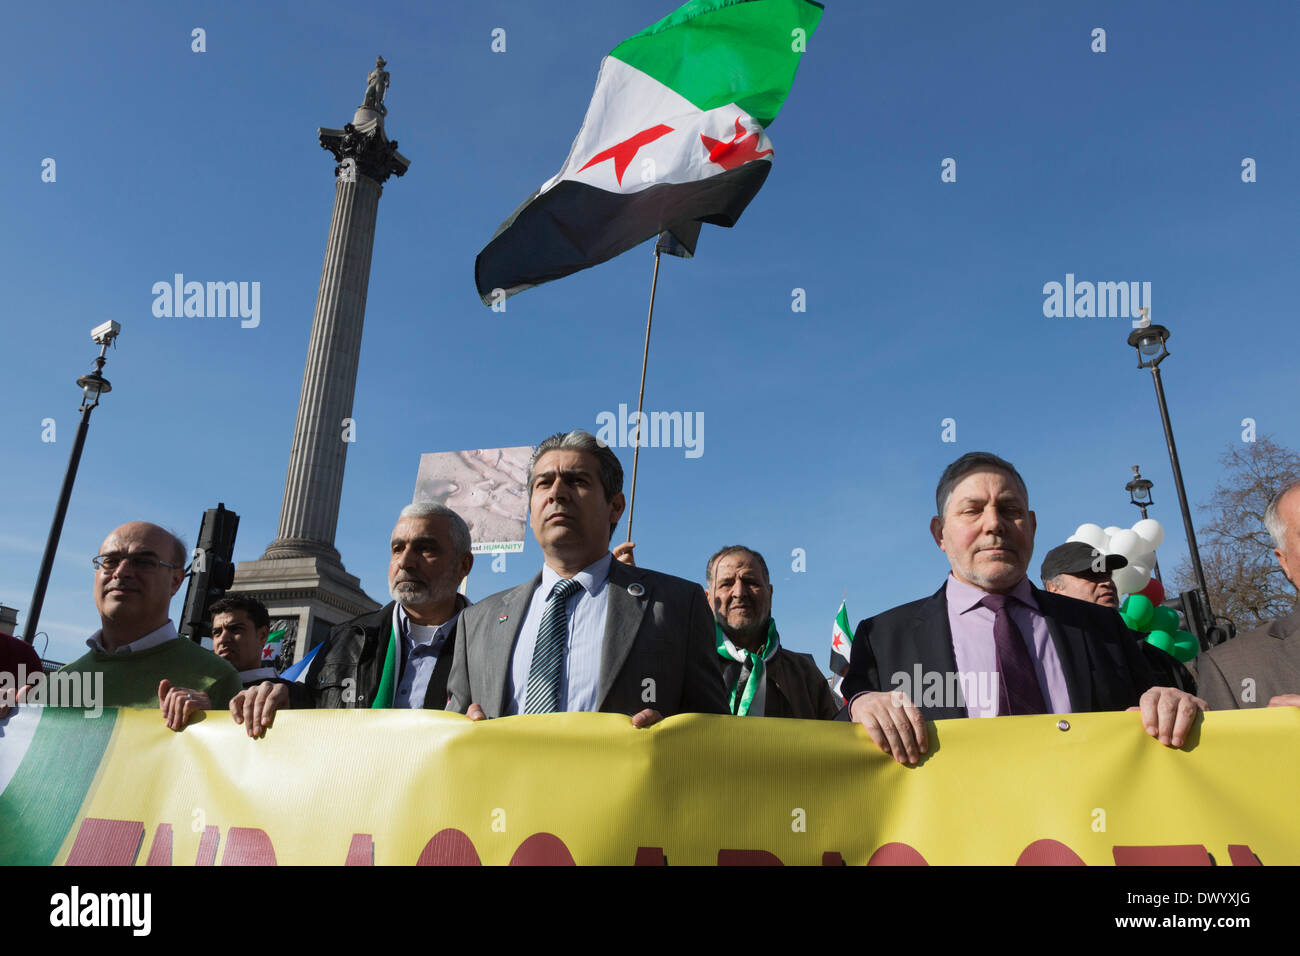 London, UK. 15 March 2014. A march against Assad's regime and the killing of citizens in Syria takes place in Central London. Credit:  Nick Savage/Alamy Live News Stock Photo